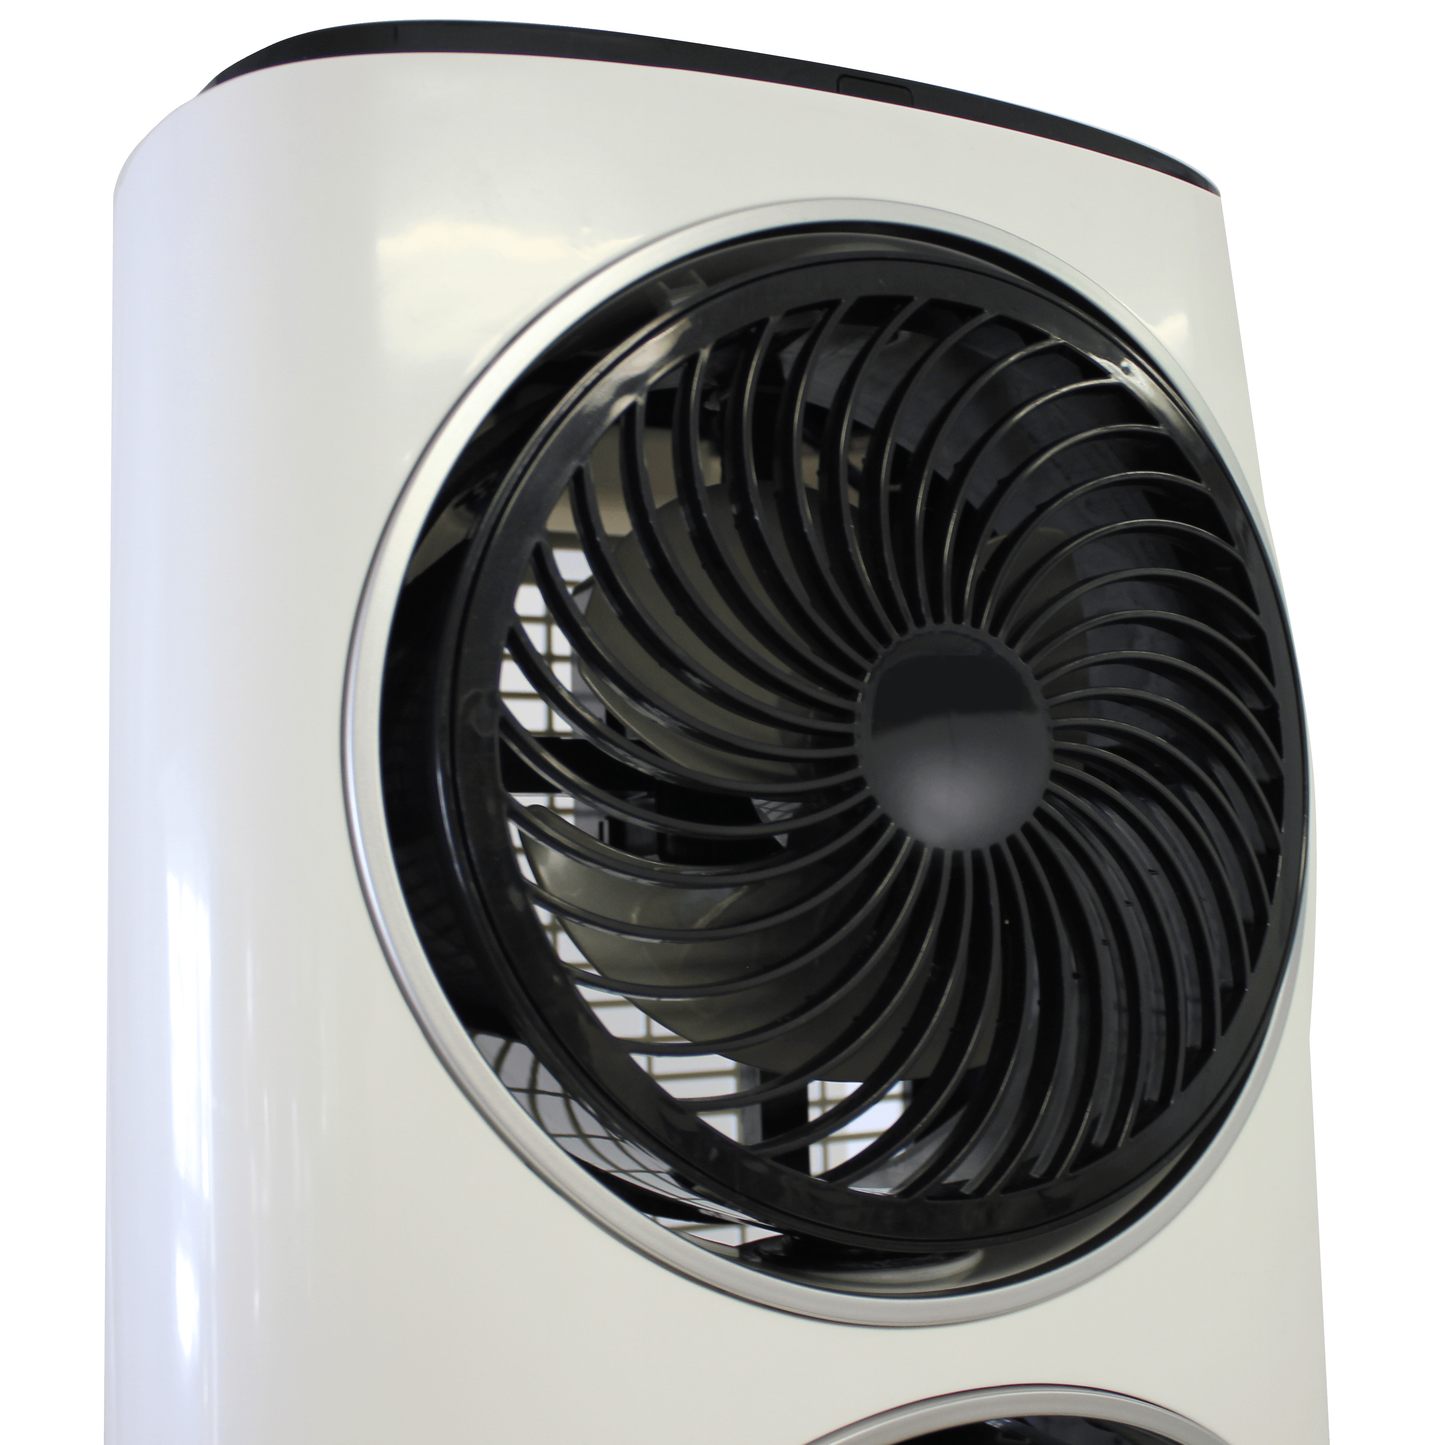 TWIN FAN EVAPORATIVE AIR COOLER WITH REMOTE CONTROL - Alva Lifestyle Retail